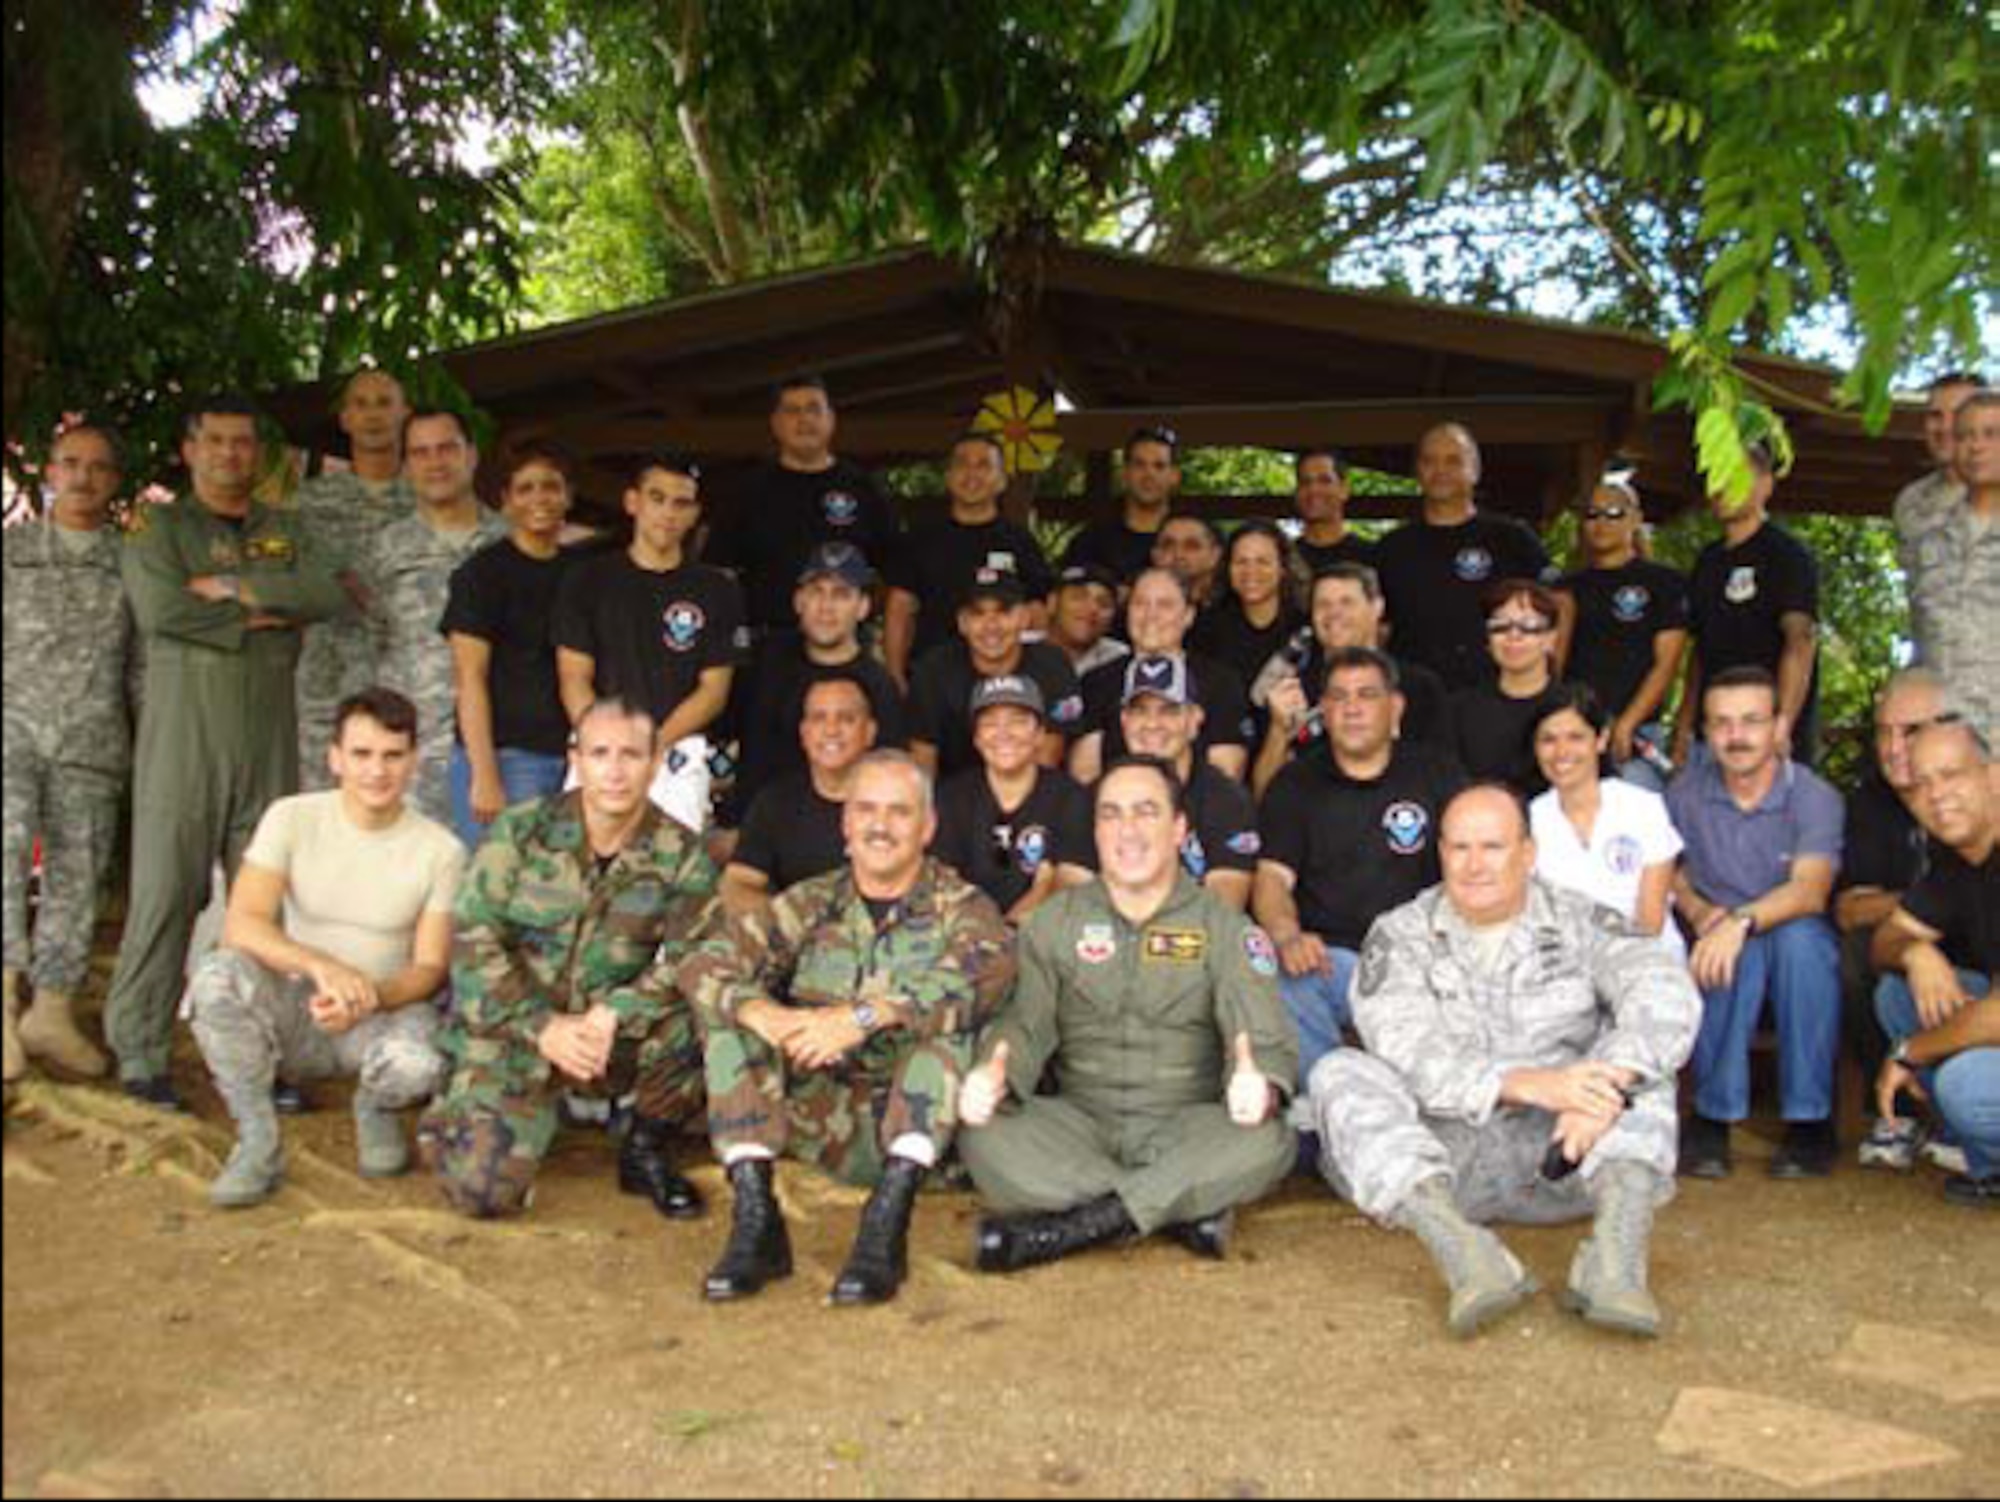 The Puerto Rico National Guard PRANG celebrated the National Guard Week with a series of events across the island from 8-12 Sept. 2008.